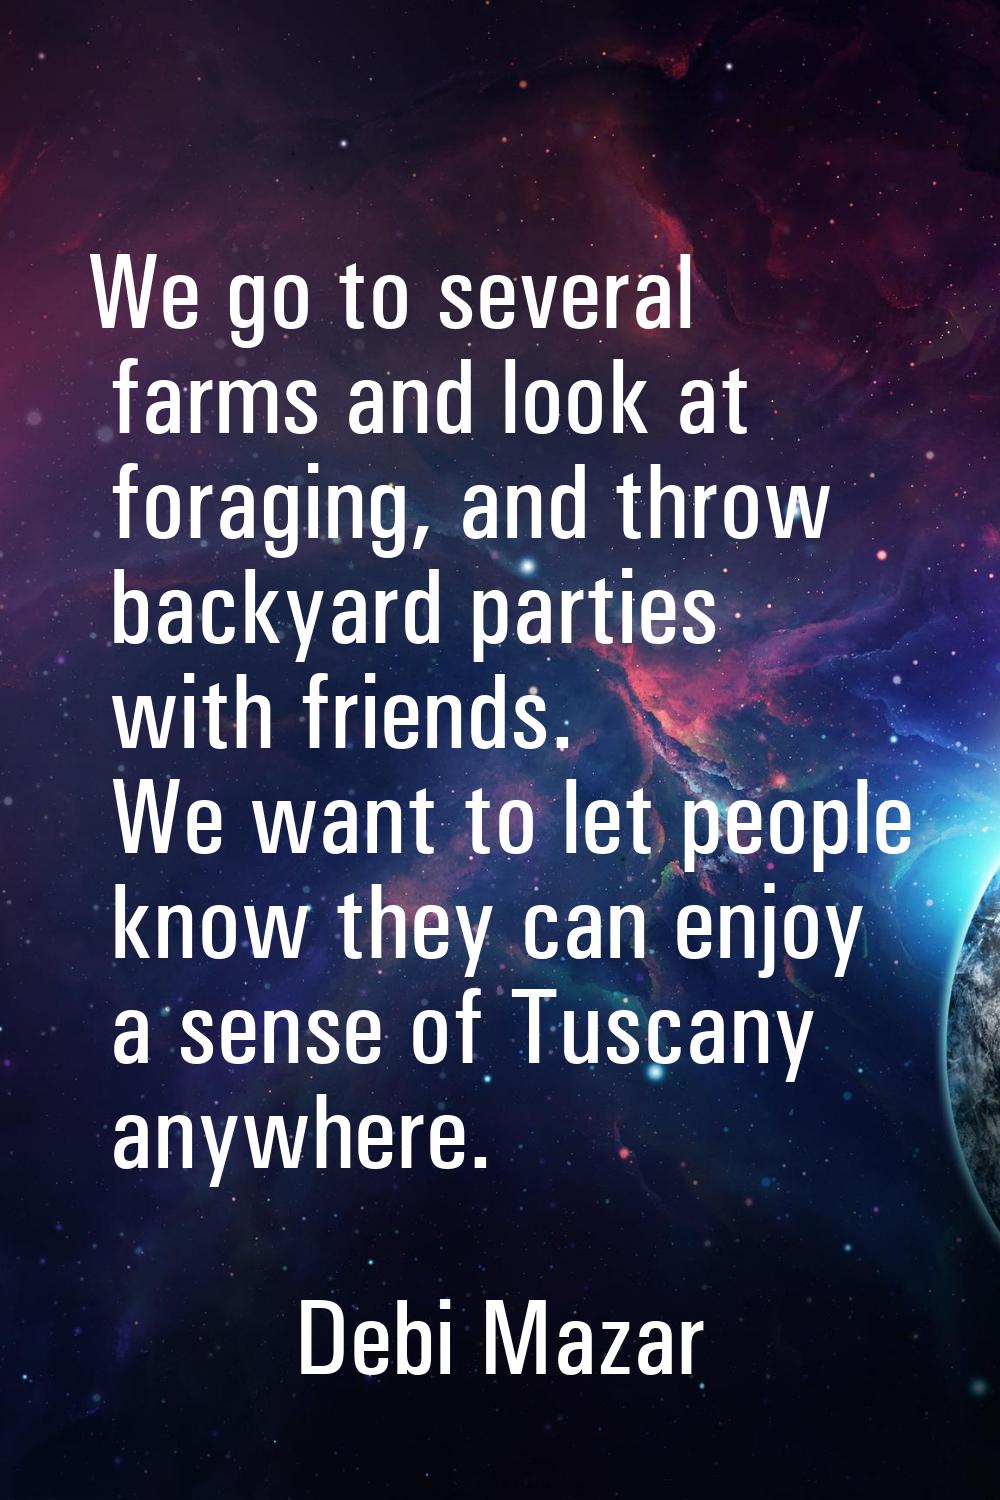 We go to several farms and look at foraging, and throw backyard parties with friends. We want to le